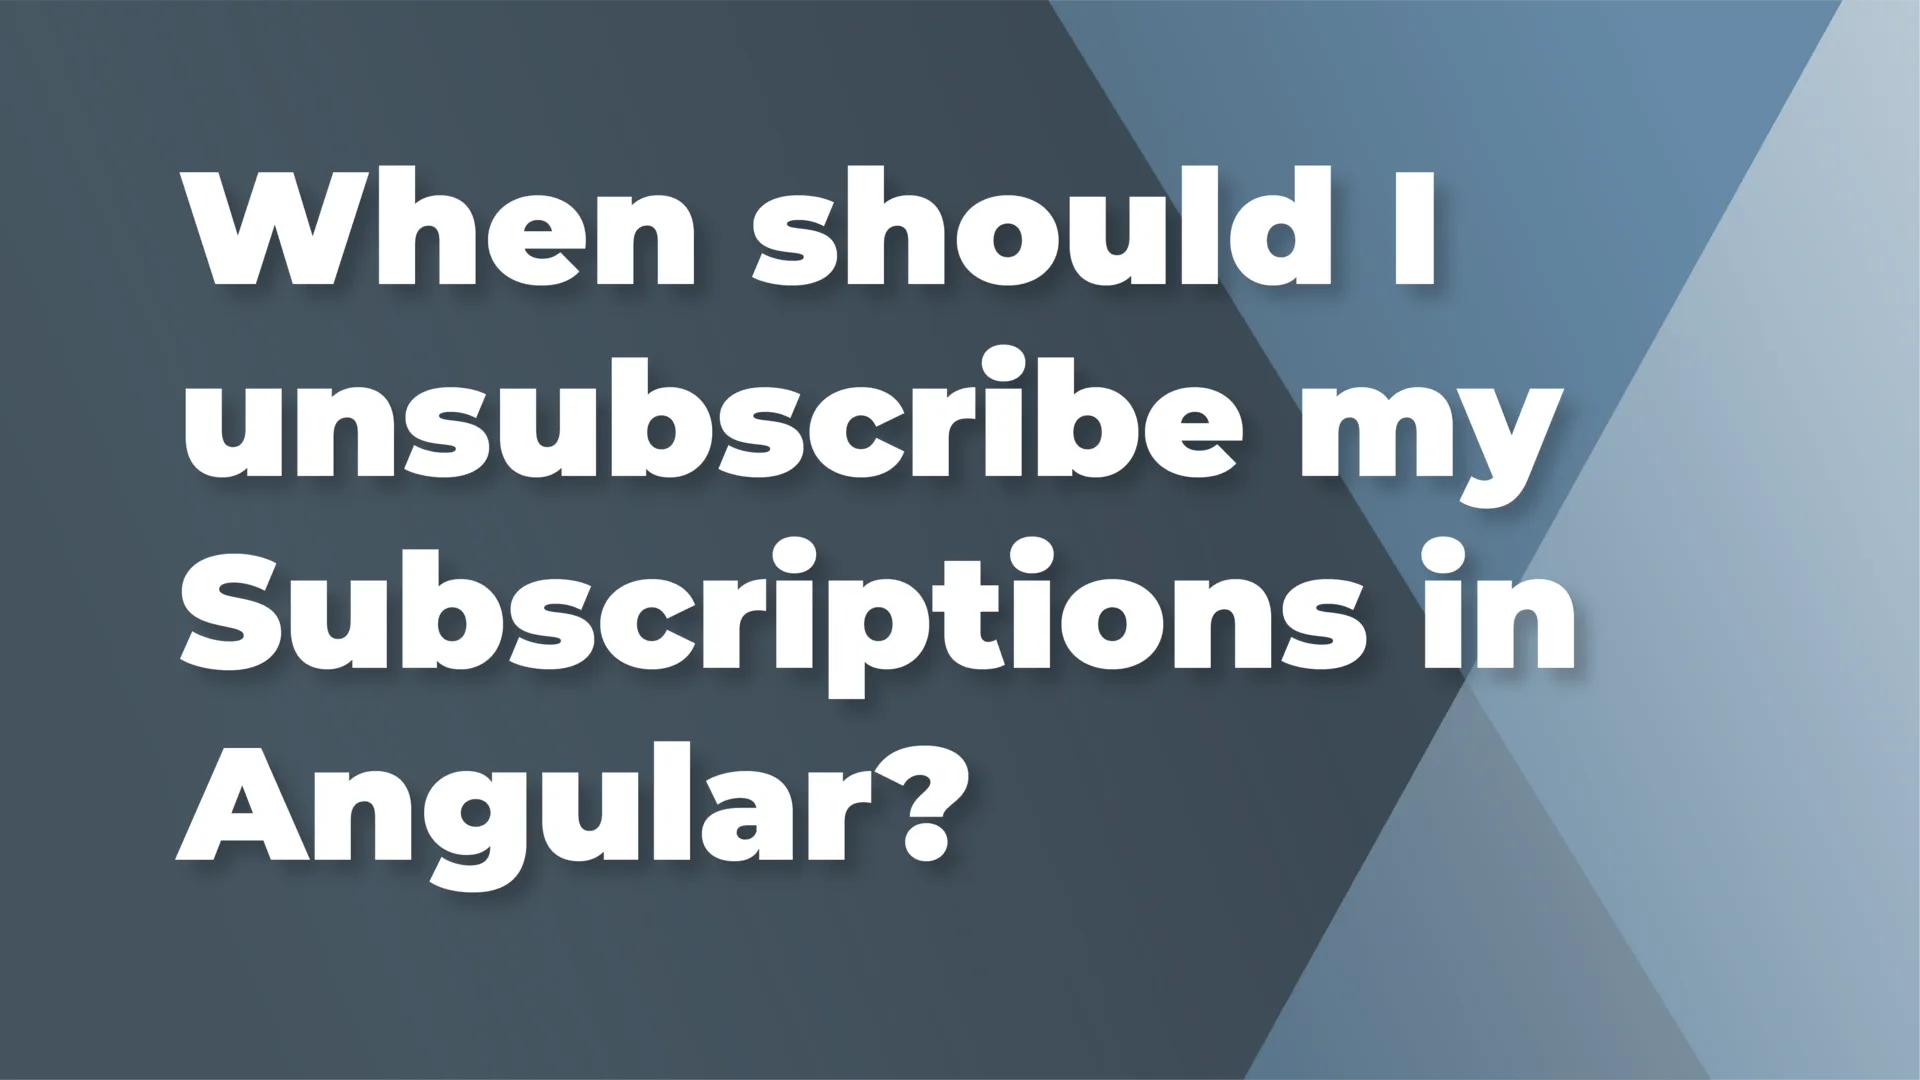 When should I unsubscribe my Subscriptions in Angular?